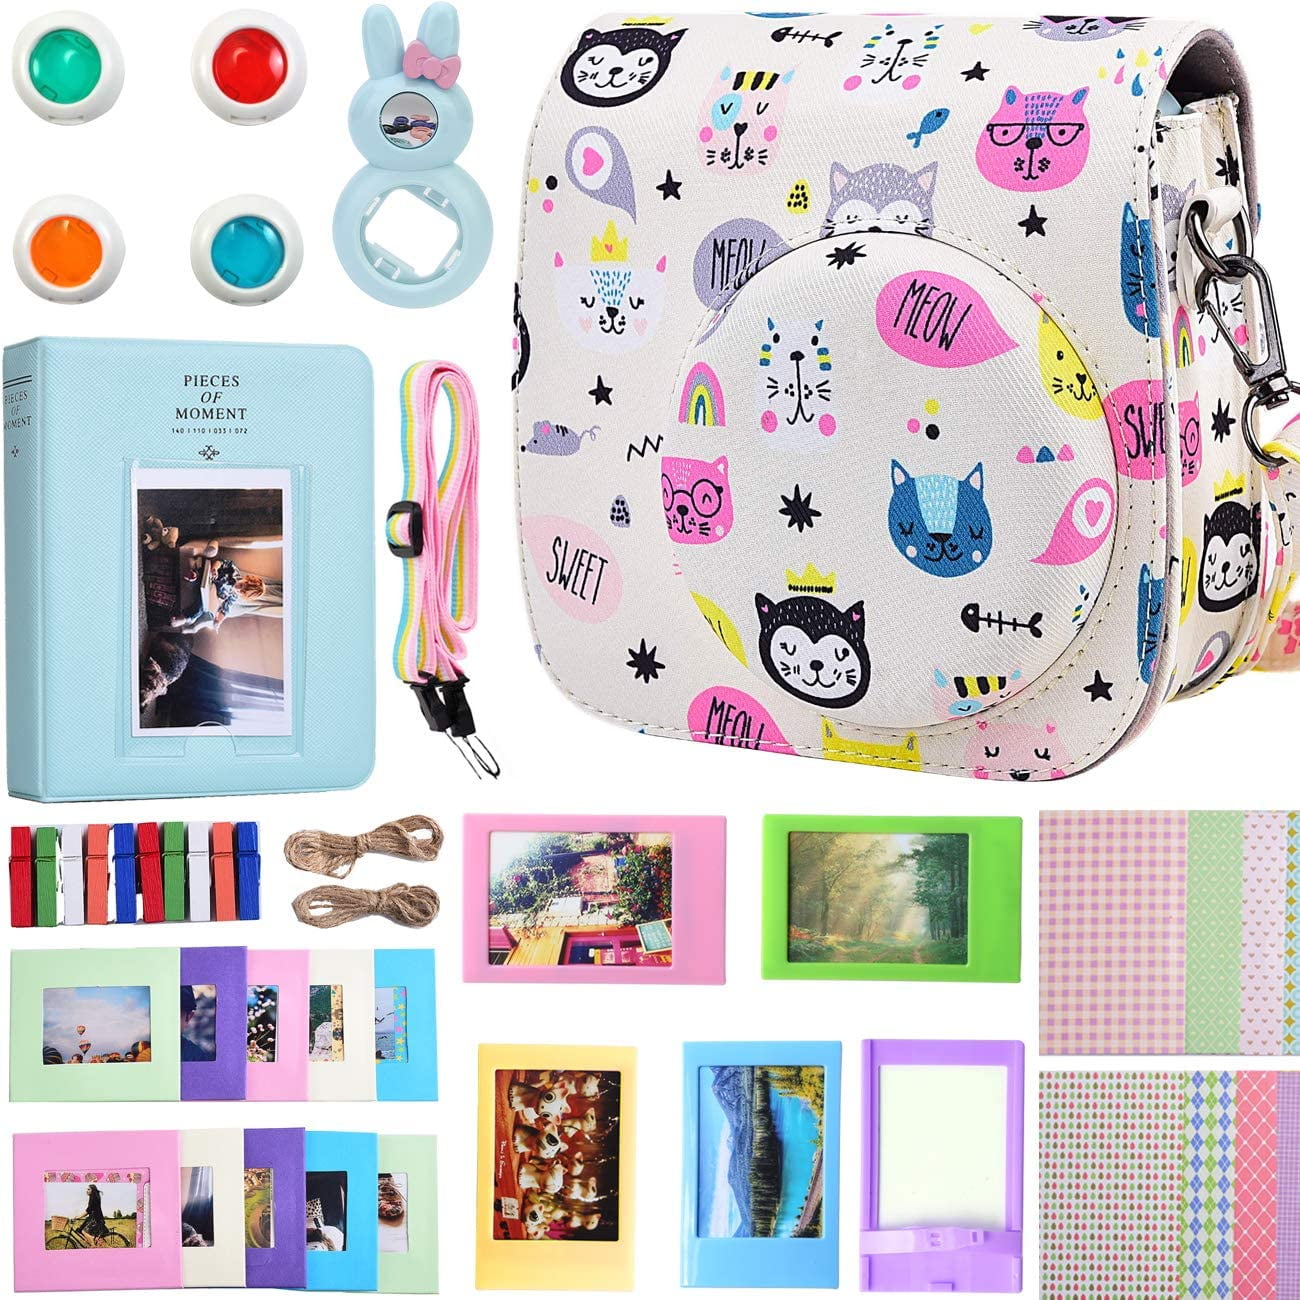 Bundle Pack Include Albums Shoulder Strap&Other Accessories Case & Accessories Compatible with Fujifilm Instax Mini 11 Instant Polaroid Film Camera White 